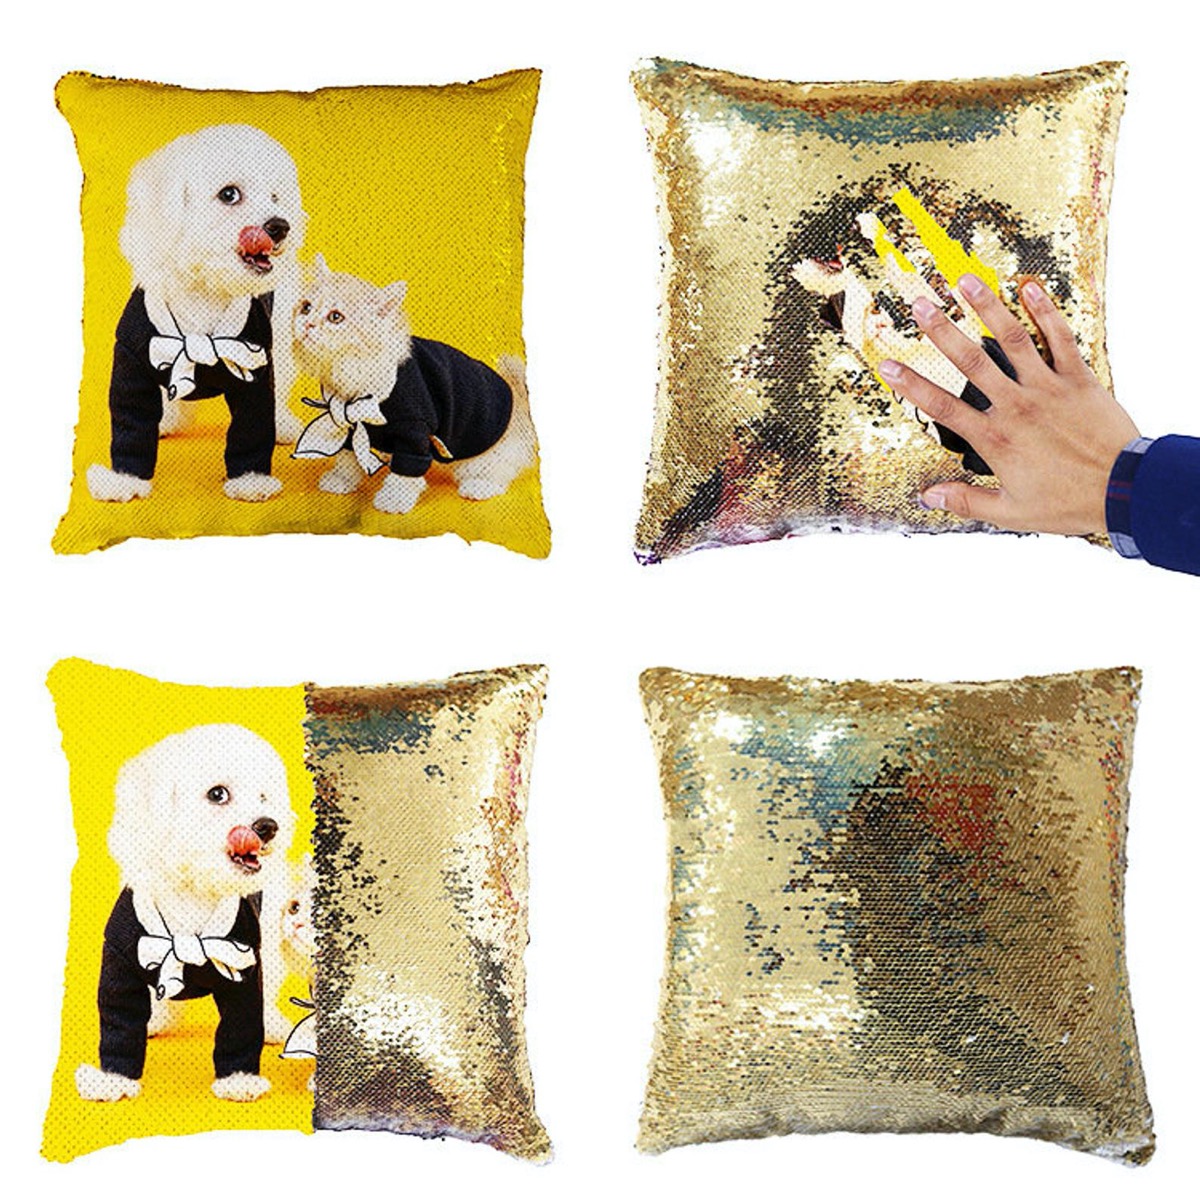 pillow with gold sequins revealing a small white dog